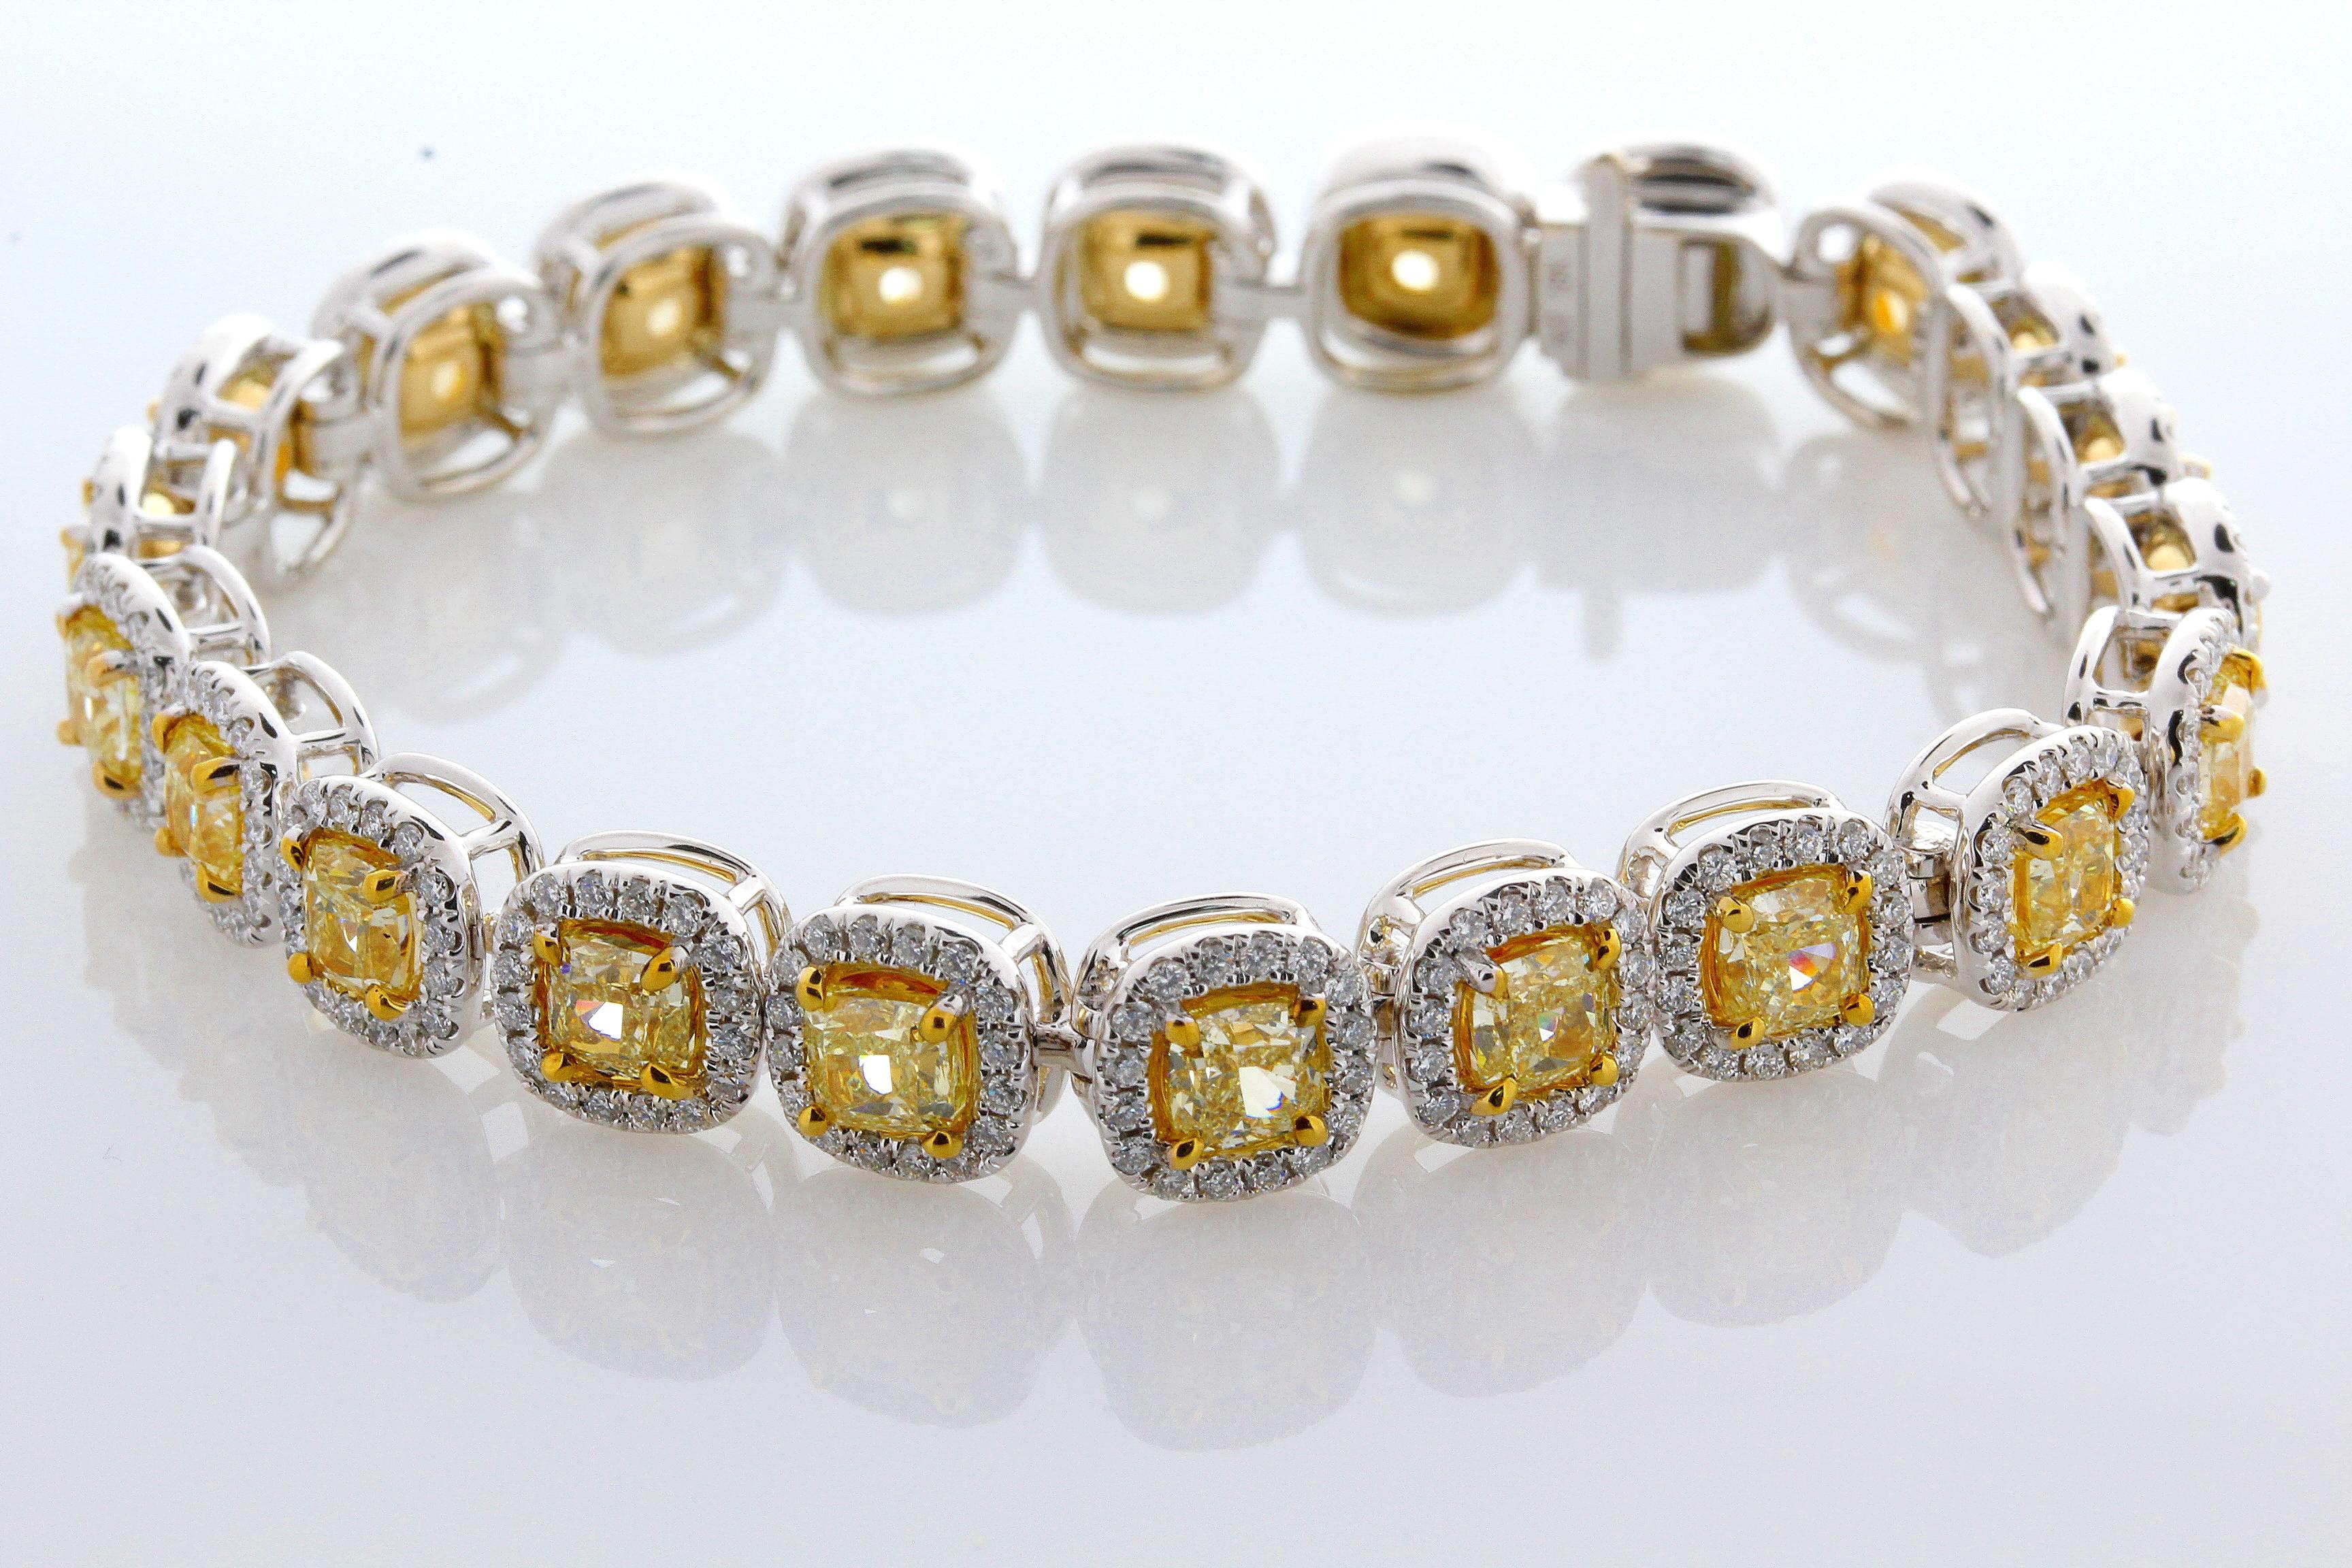 Video available upon request. 
11.88 Carat Cushion Cut, perfectly matched Natural Fancy Yellow, VS2+ Clarity Diamond Tennis Bracelet. Total Carat Weight on the Bracelet is 14.58.
This contemporary mounting is formed from 18 Karat White and 18K